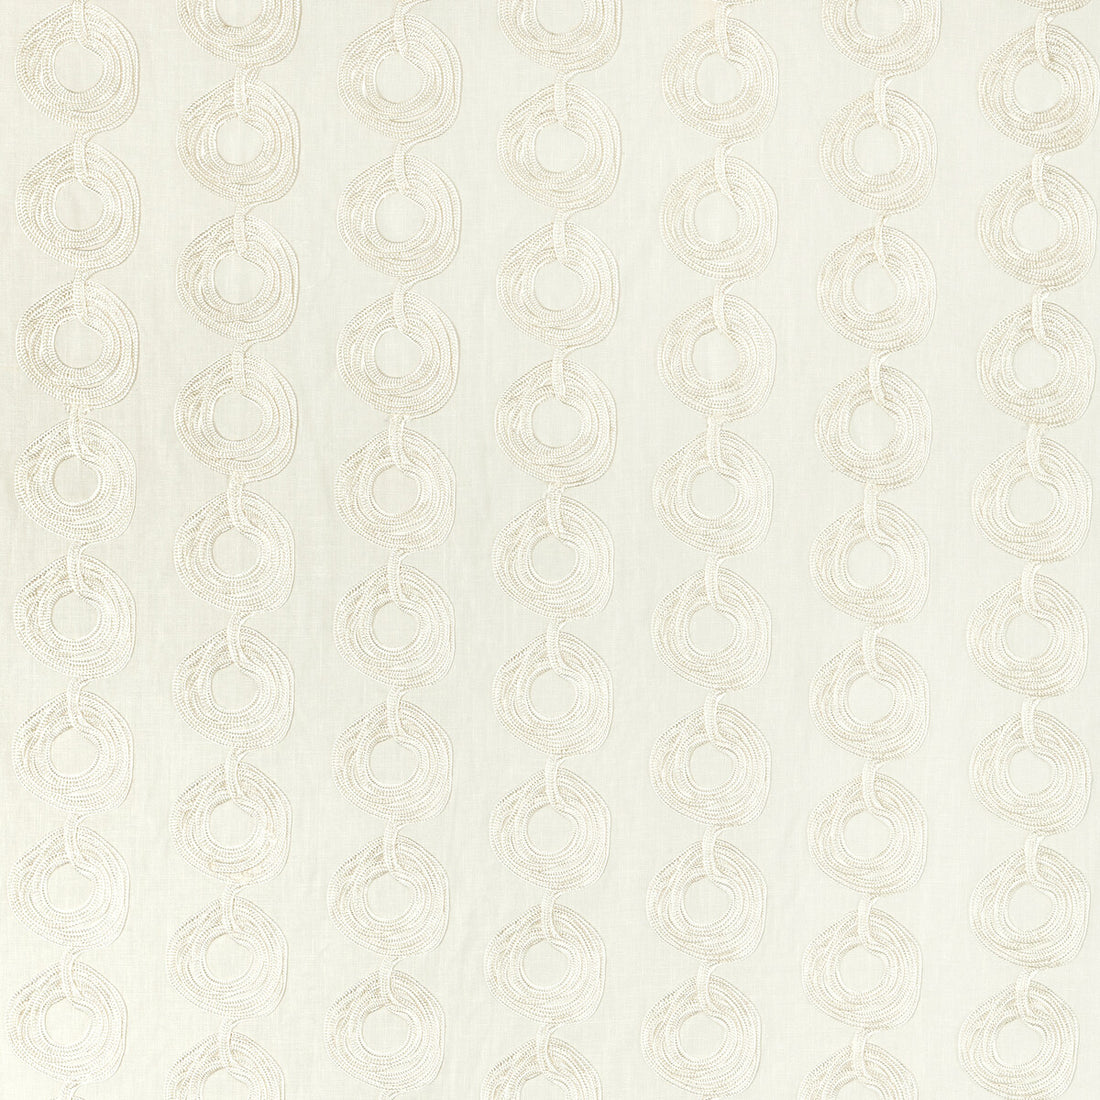 Coincide fabric in ivory color - pattern 36338.1.0 - by Kravet Couture in the Modern Luxe III collection